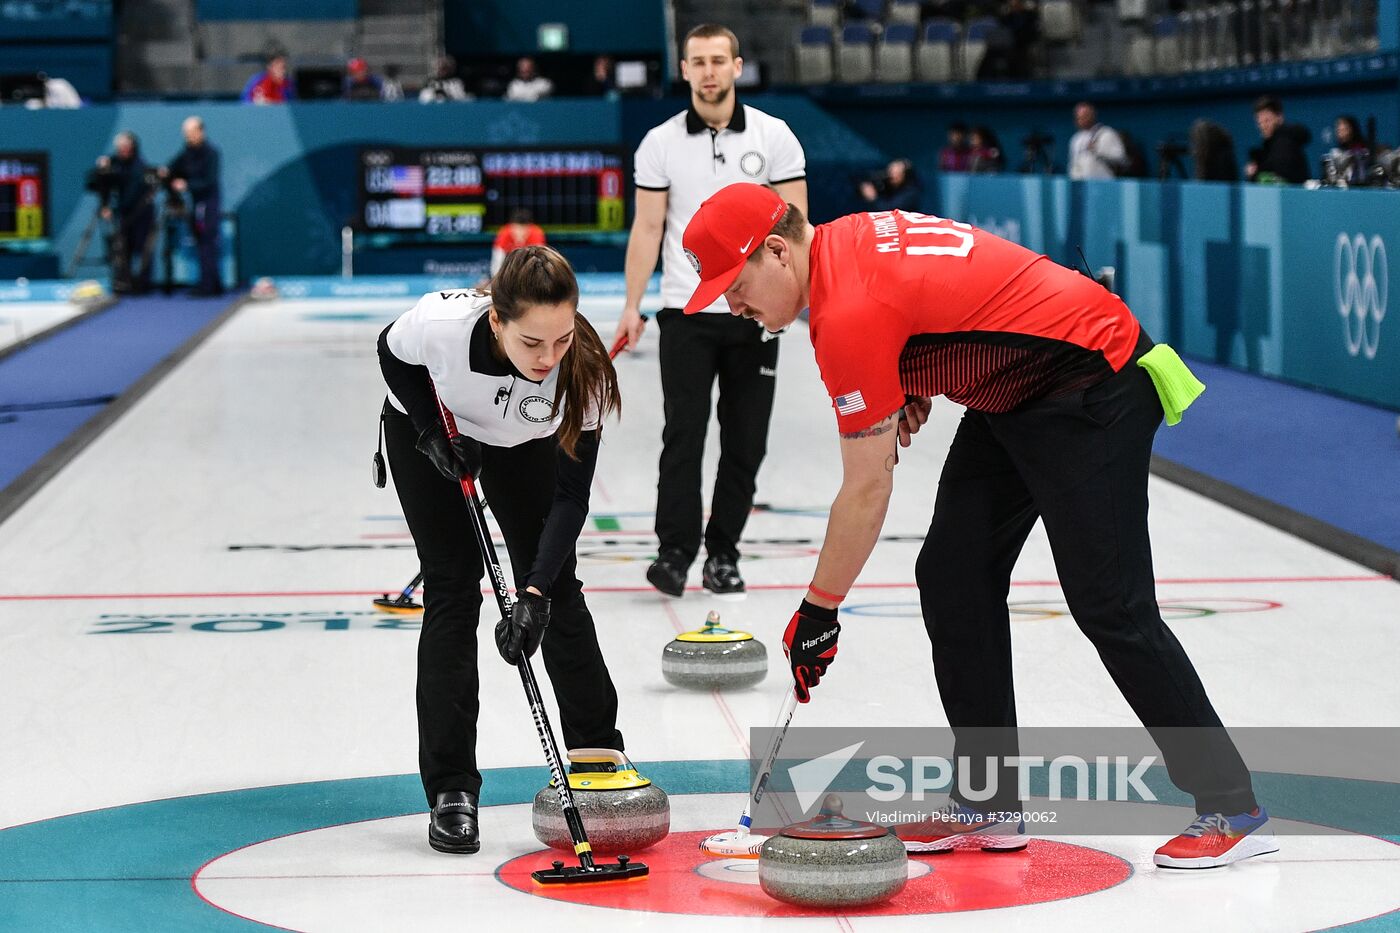 2018 Winter Olympics. Curling. Mixed Doubles. US vs Russia